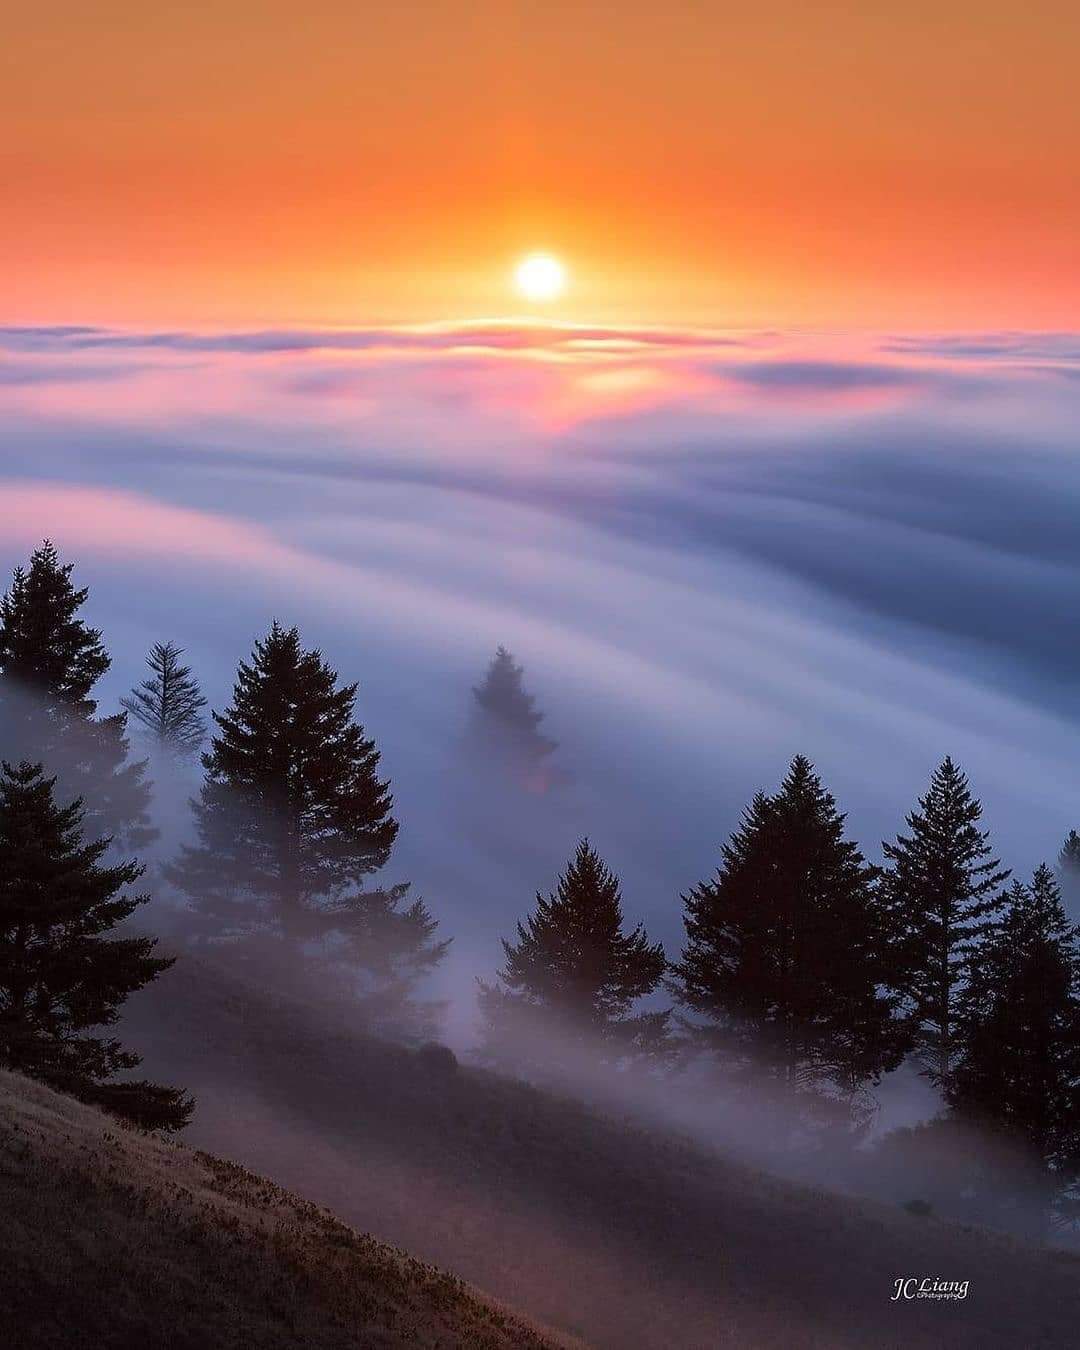 A view of the sun setting over trees in the fog.